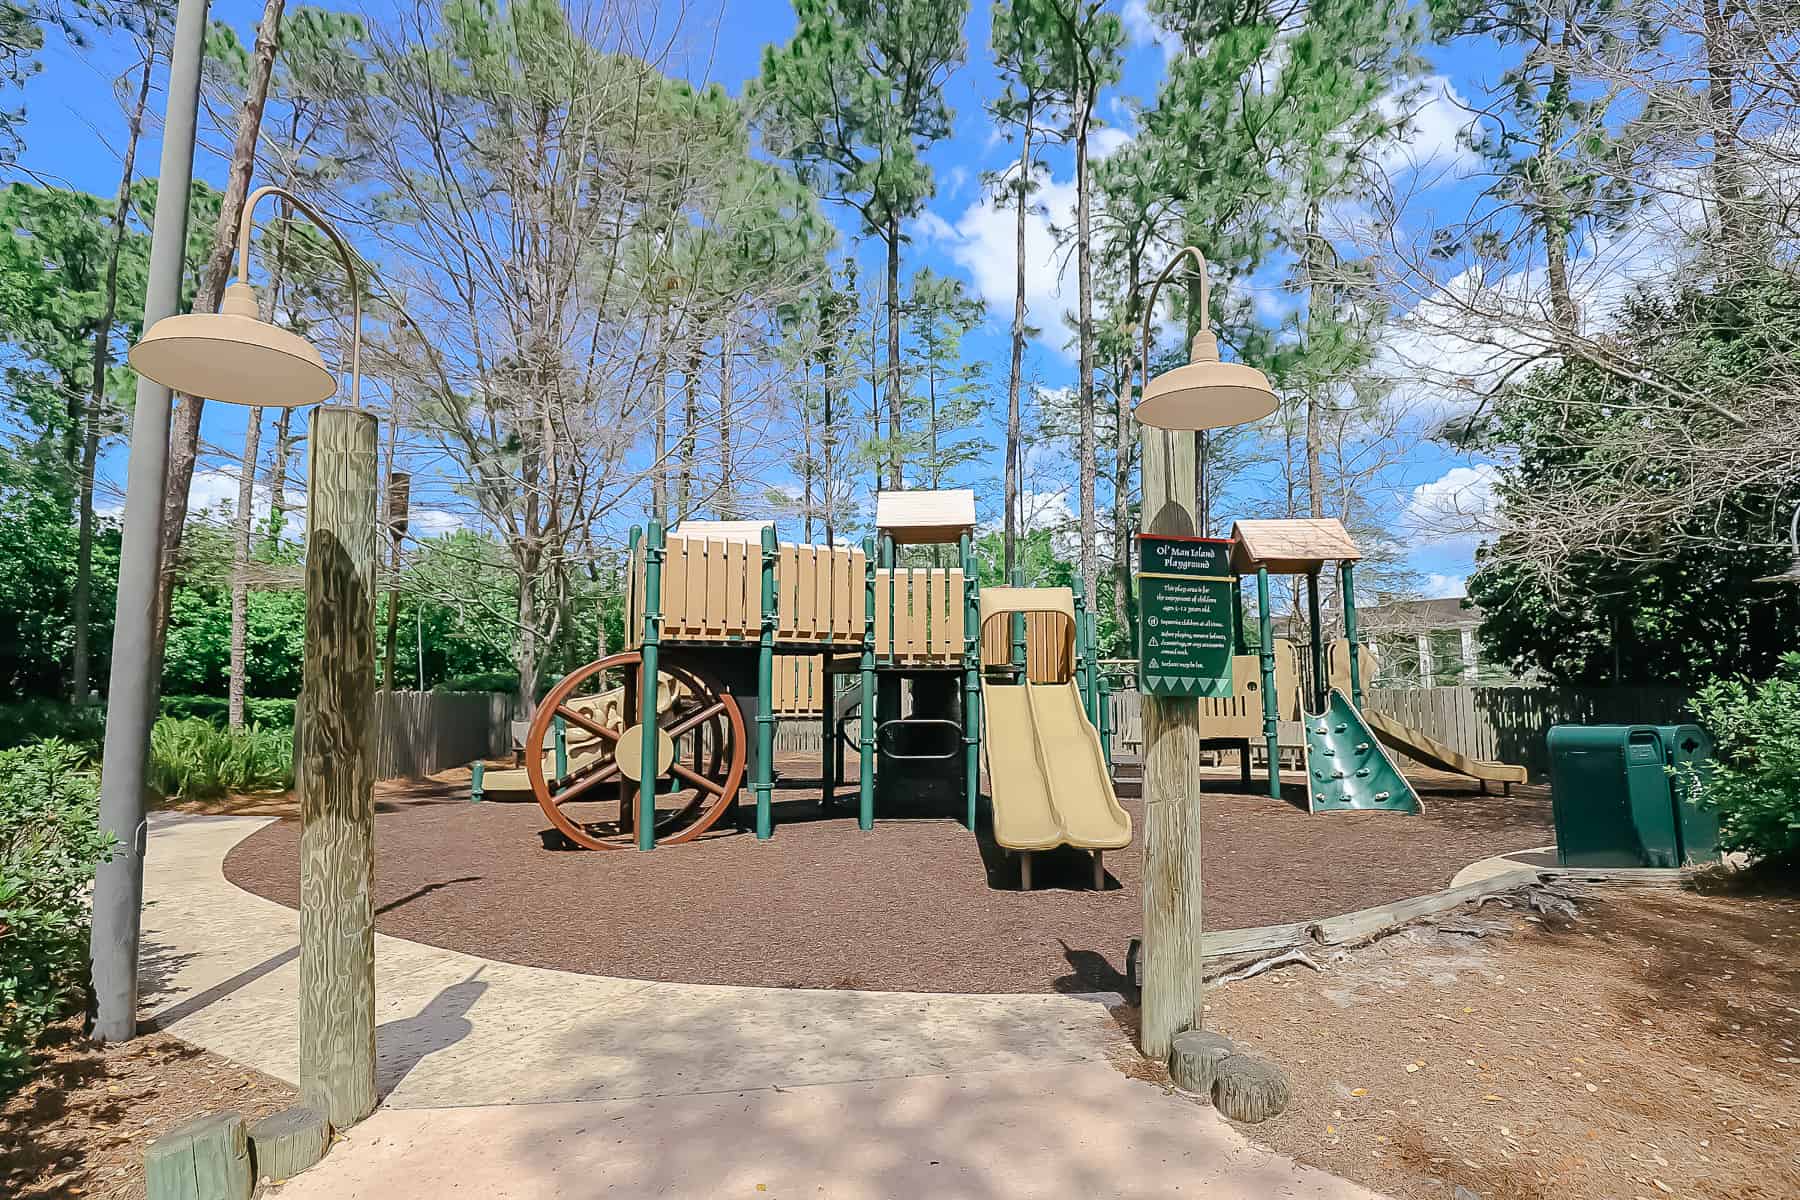 the playground with equipment 